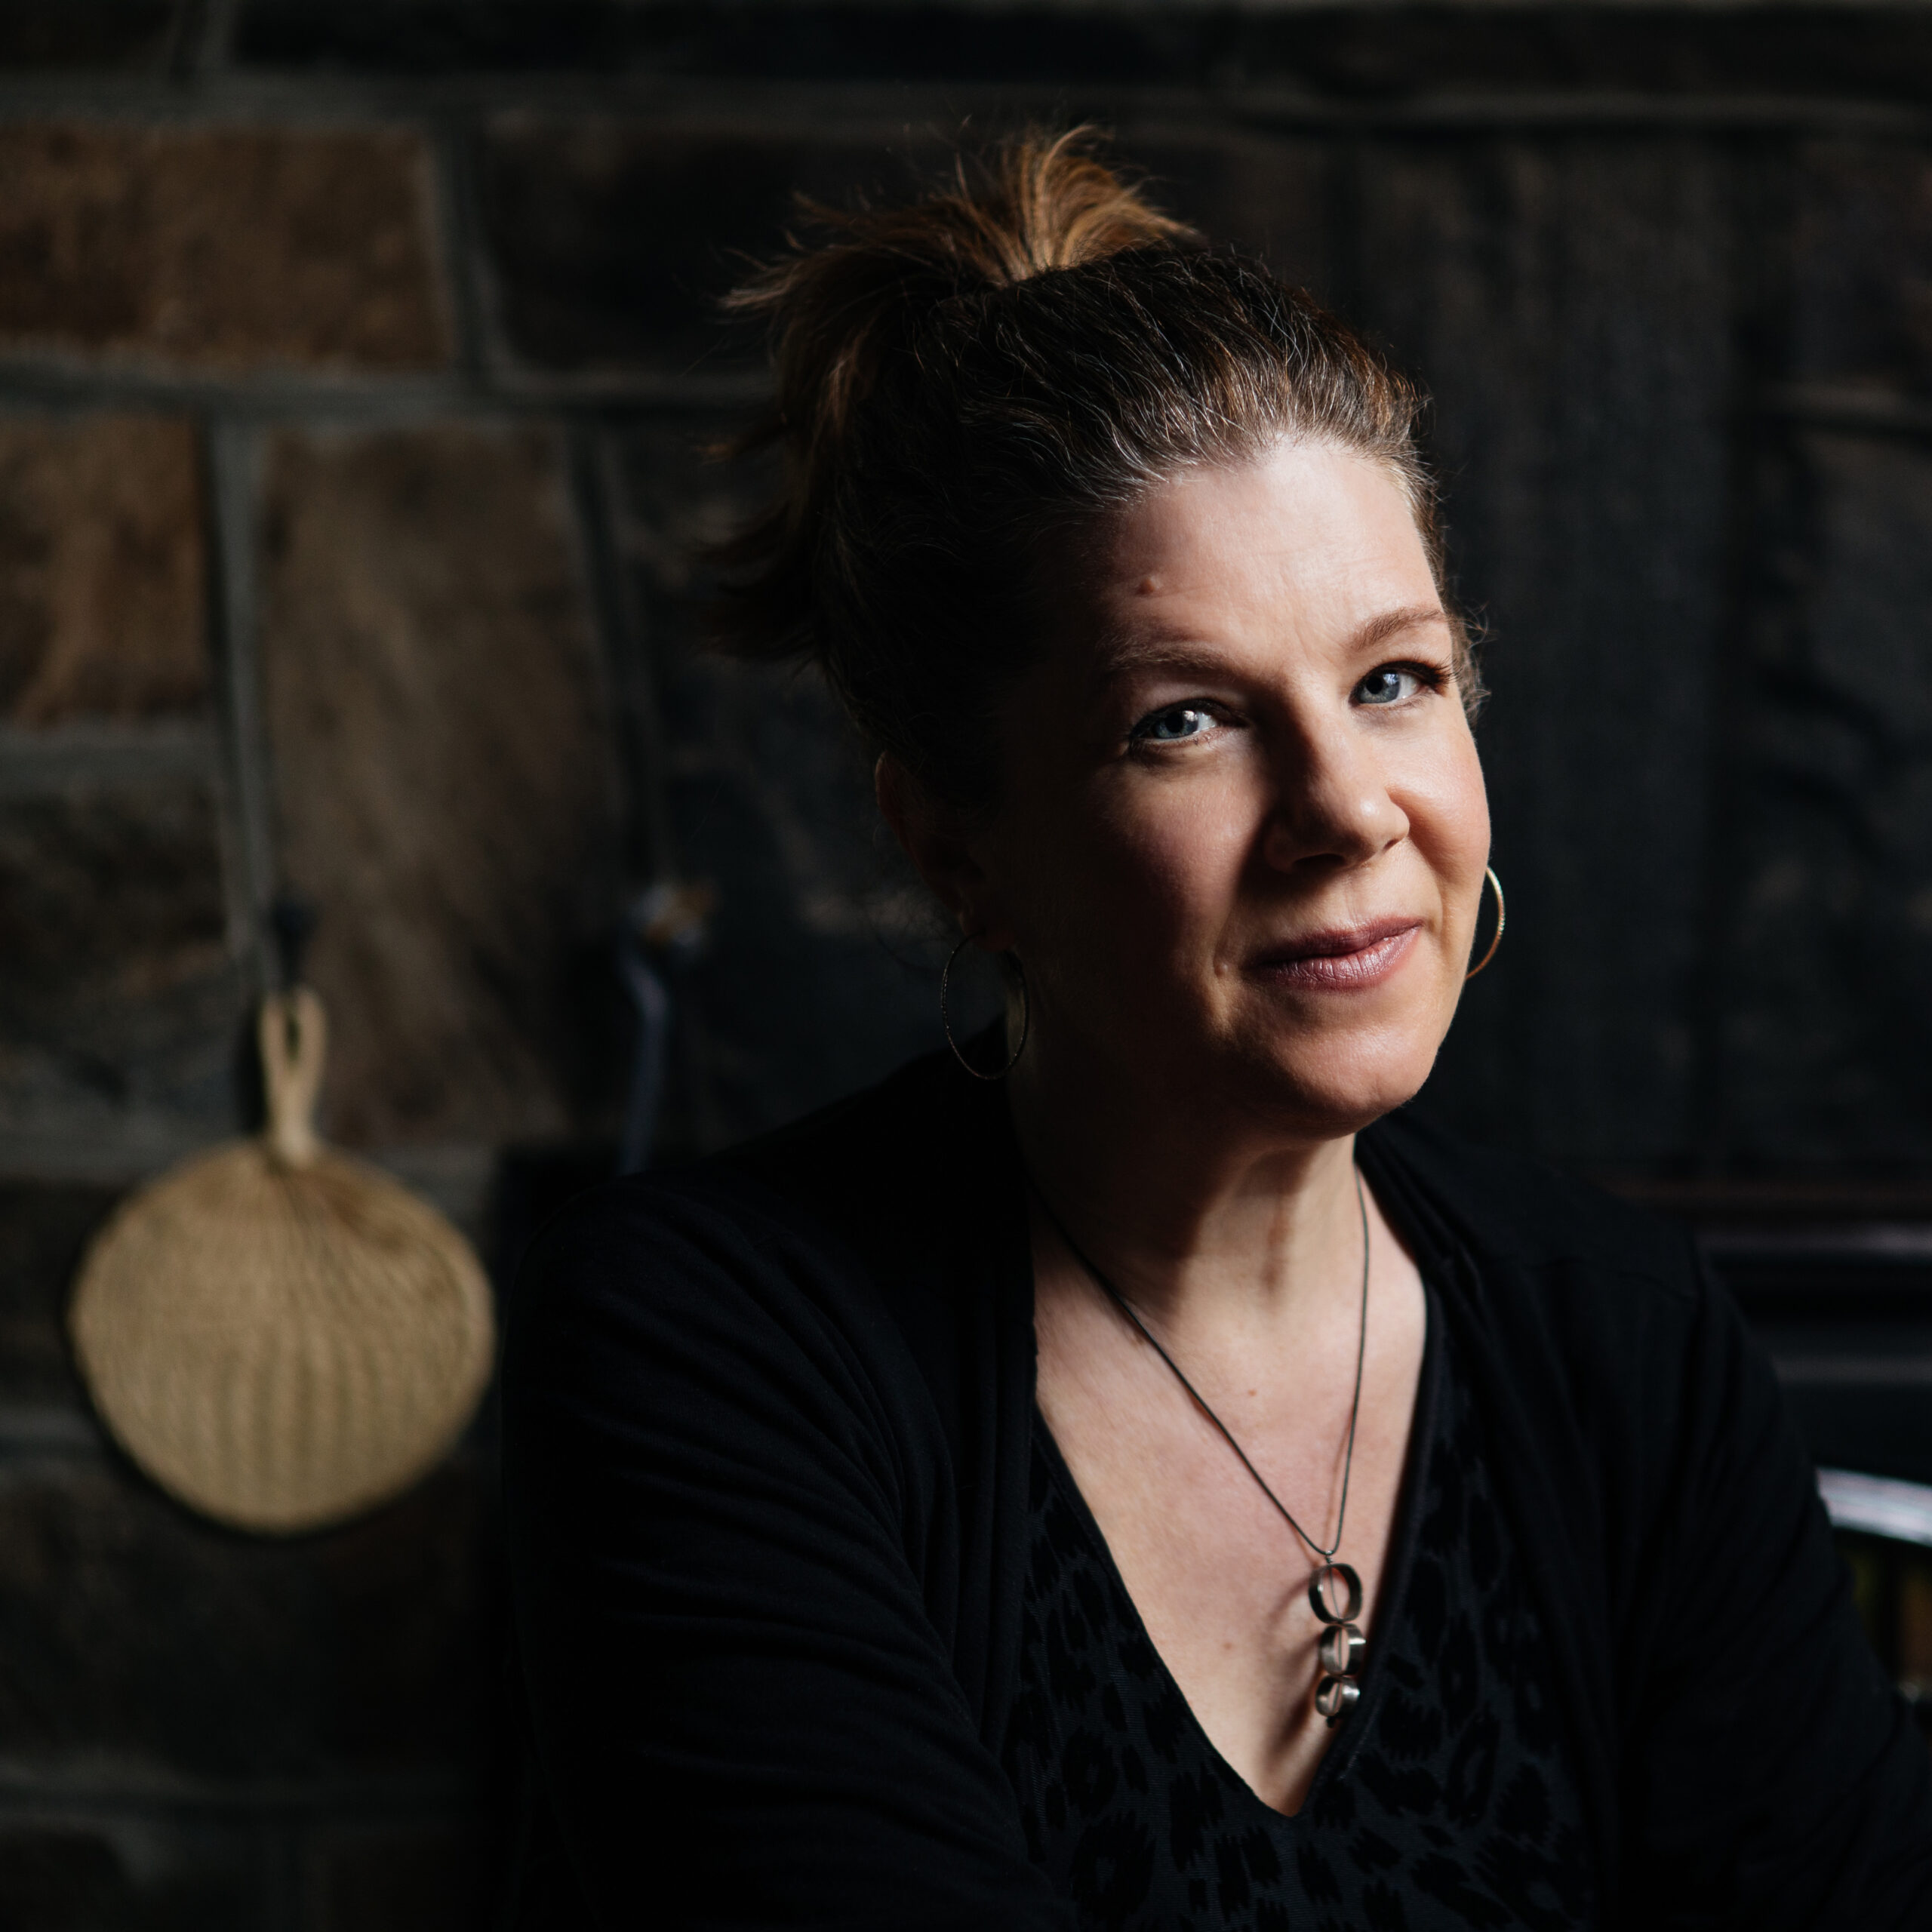 Dar Williams sitting at a table smiling<br />
and wearing a black shirt